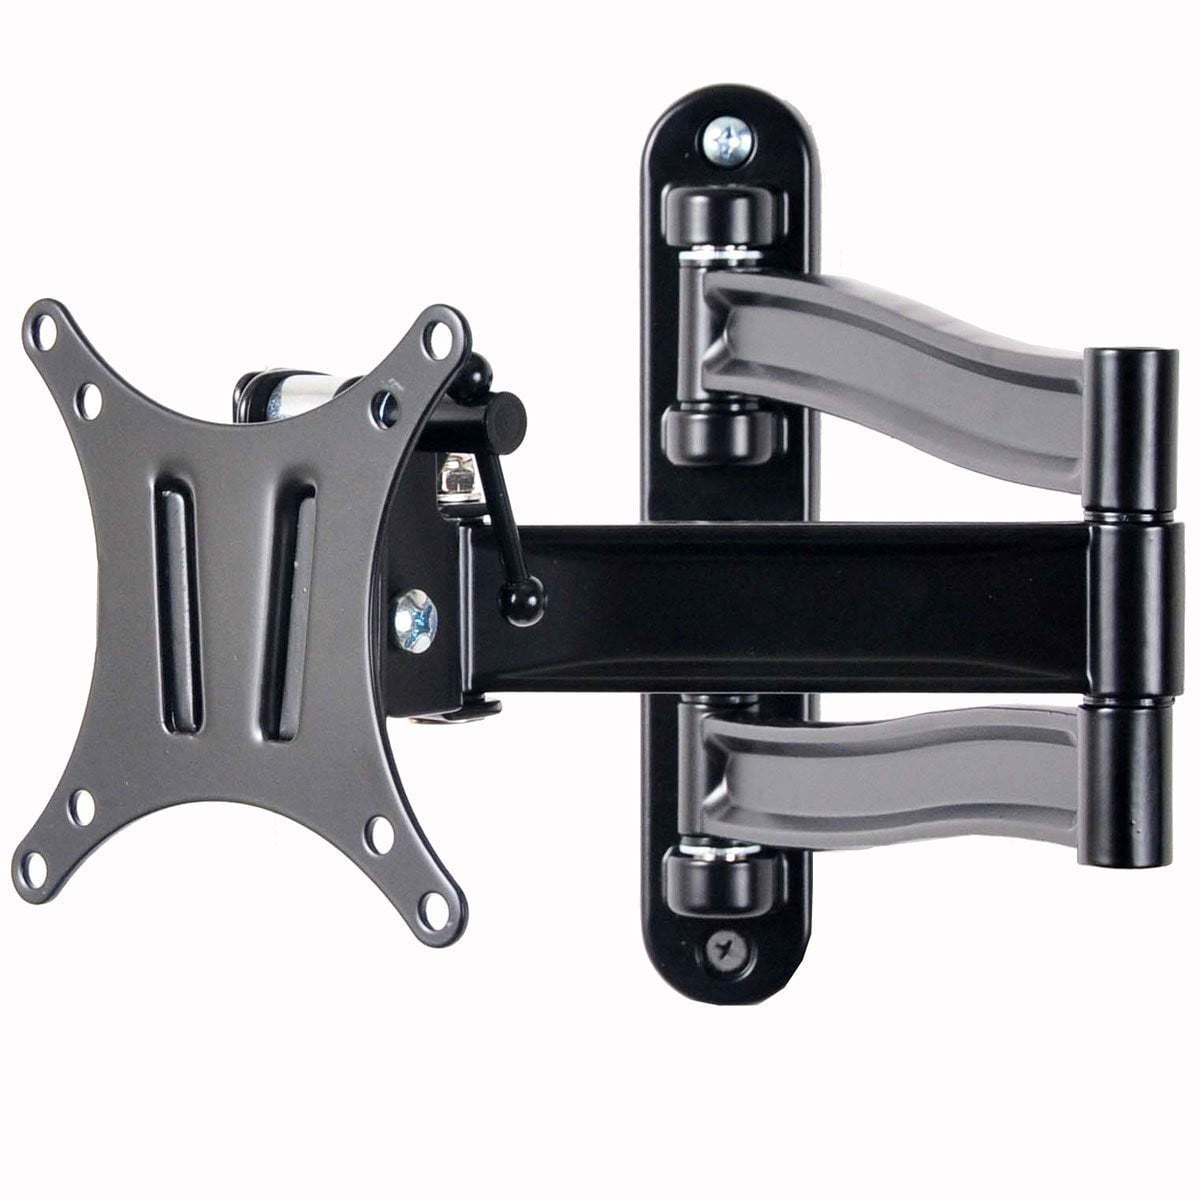 VideoSecu Articulating Monitor TV Wall Mount for 15 - 39 Display with  VESA 75x75, 100x100-Extends 20-b56